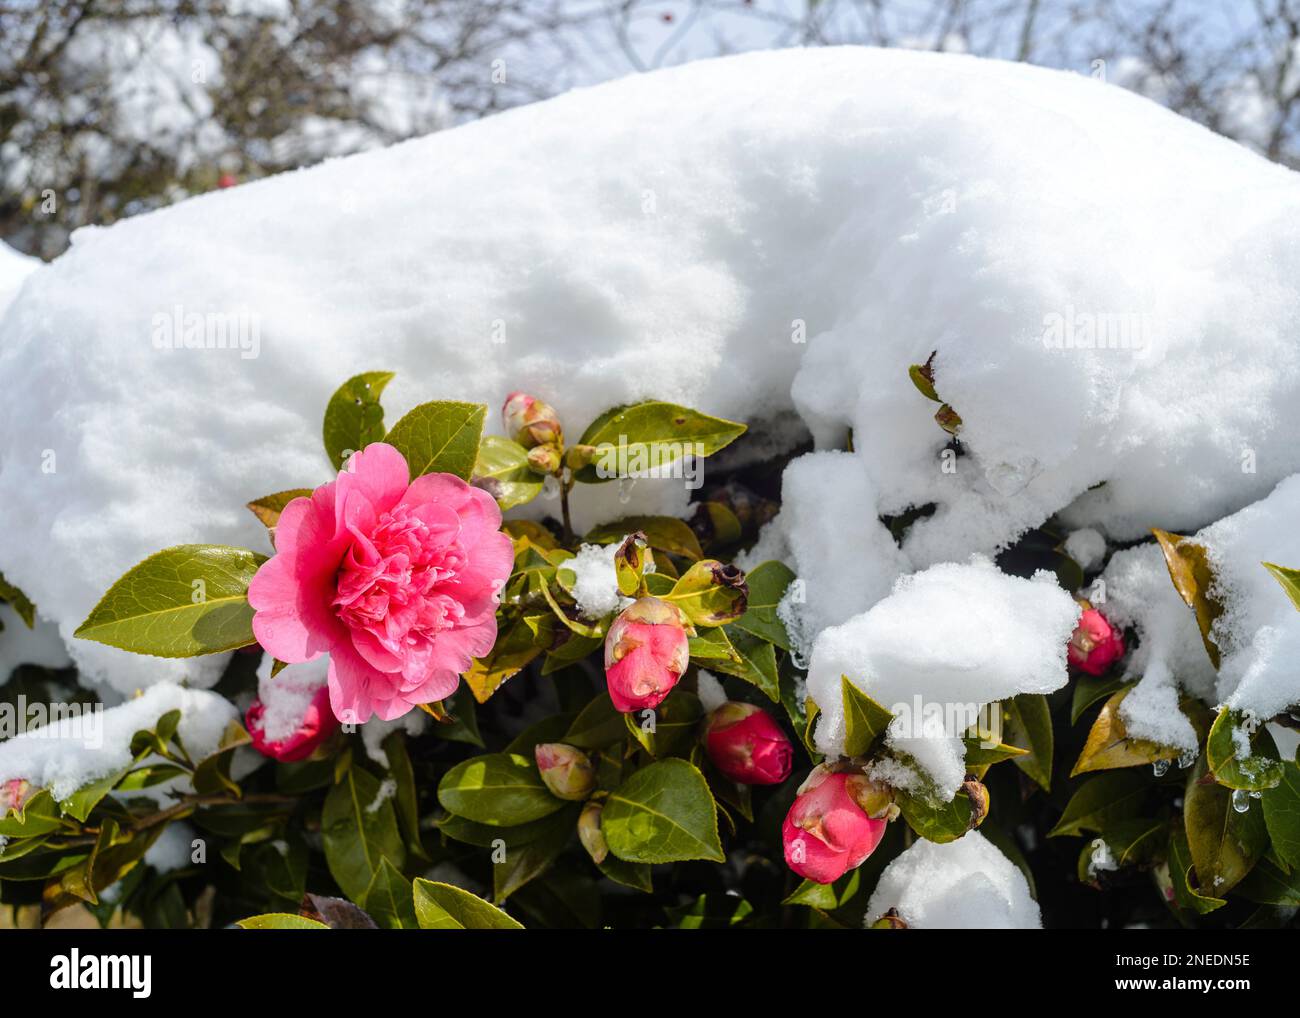 UK, England, Devon. A cottage garden. 19th March. Camellia japonica under a fall of snow. Stock Photo